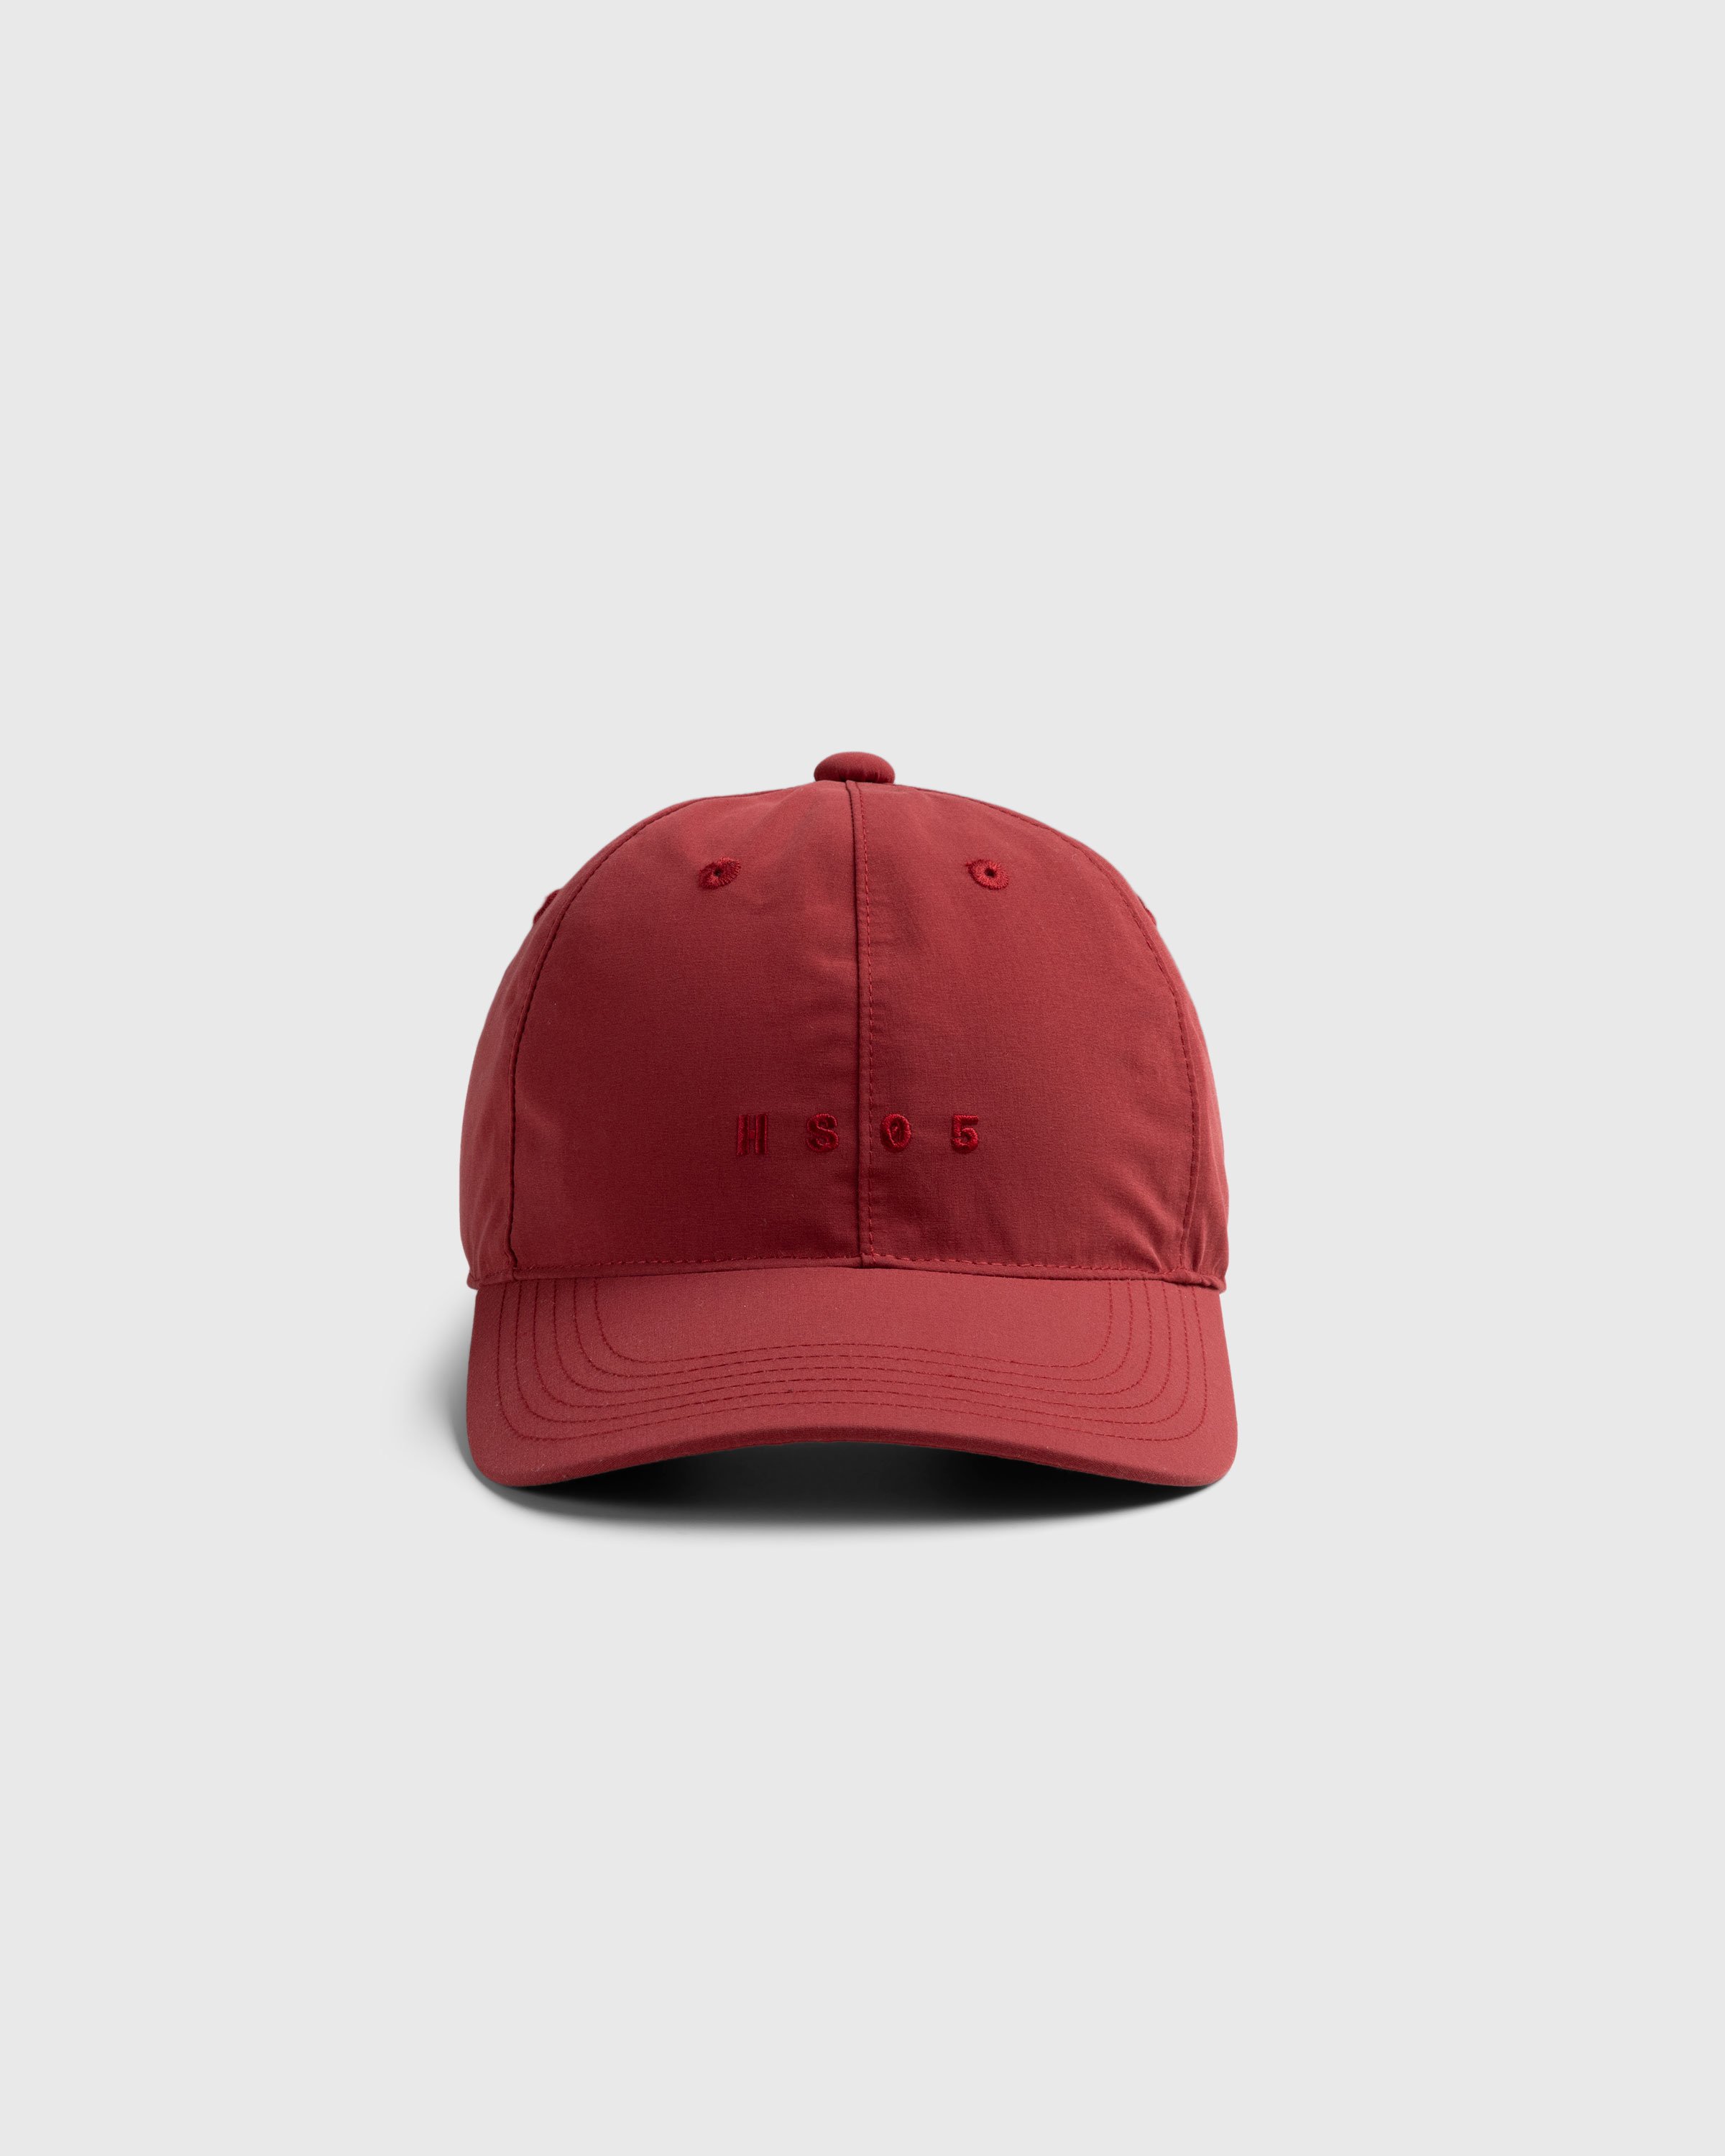 Highsnobiety HS05 - 3 Layer Taped Nylon Cap Red - Accessories - Red - Image 3